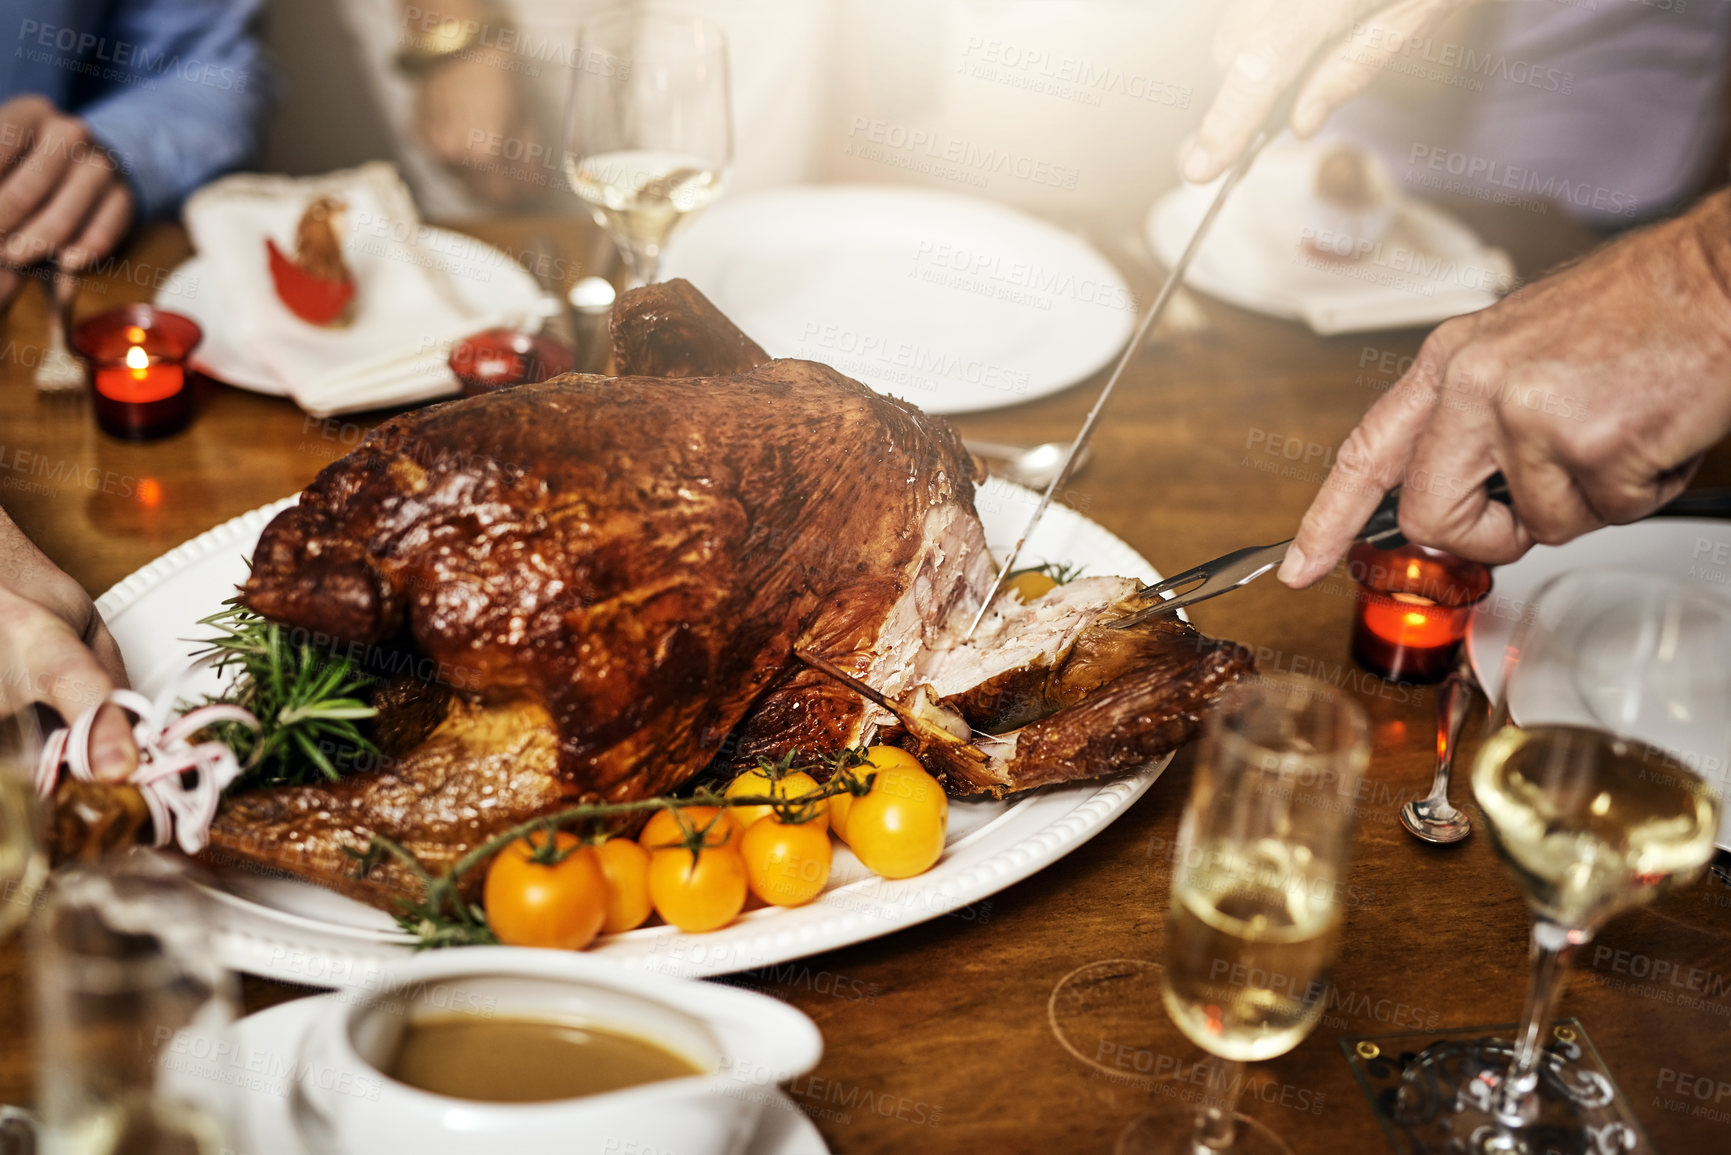 Buy stock photo Cropped shot of an unrecognizable person cutting into a turkey at Christmas lunch